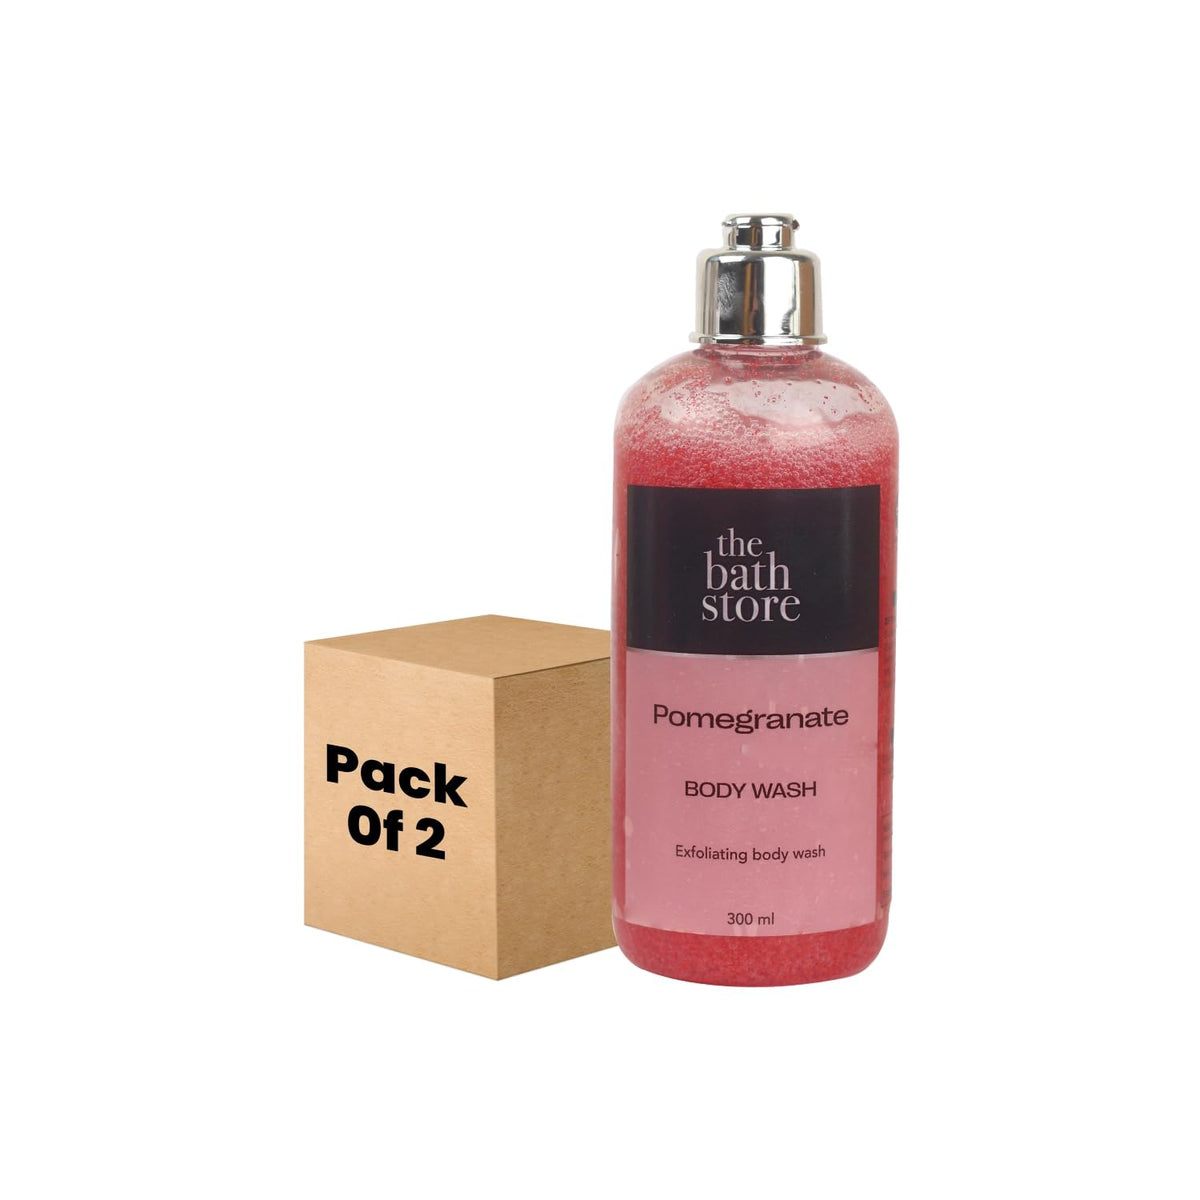 The Bath Store Pomegranate Body Wash - Deeply Cleansing | Exfoliating | Nourishing Liquid Soap | Men and Women - 300ml (Pack of 2)